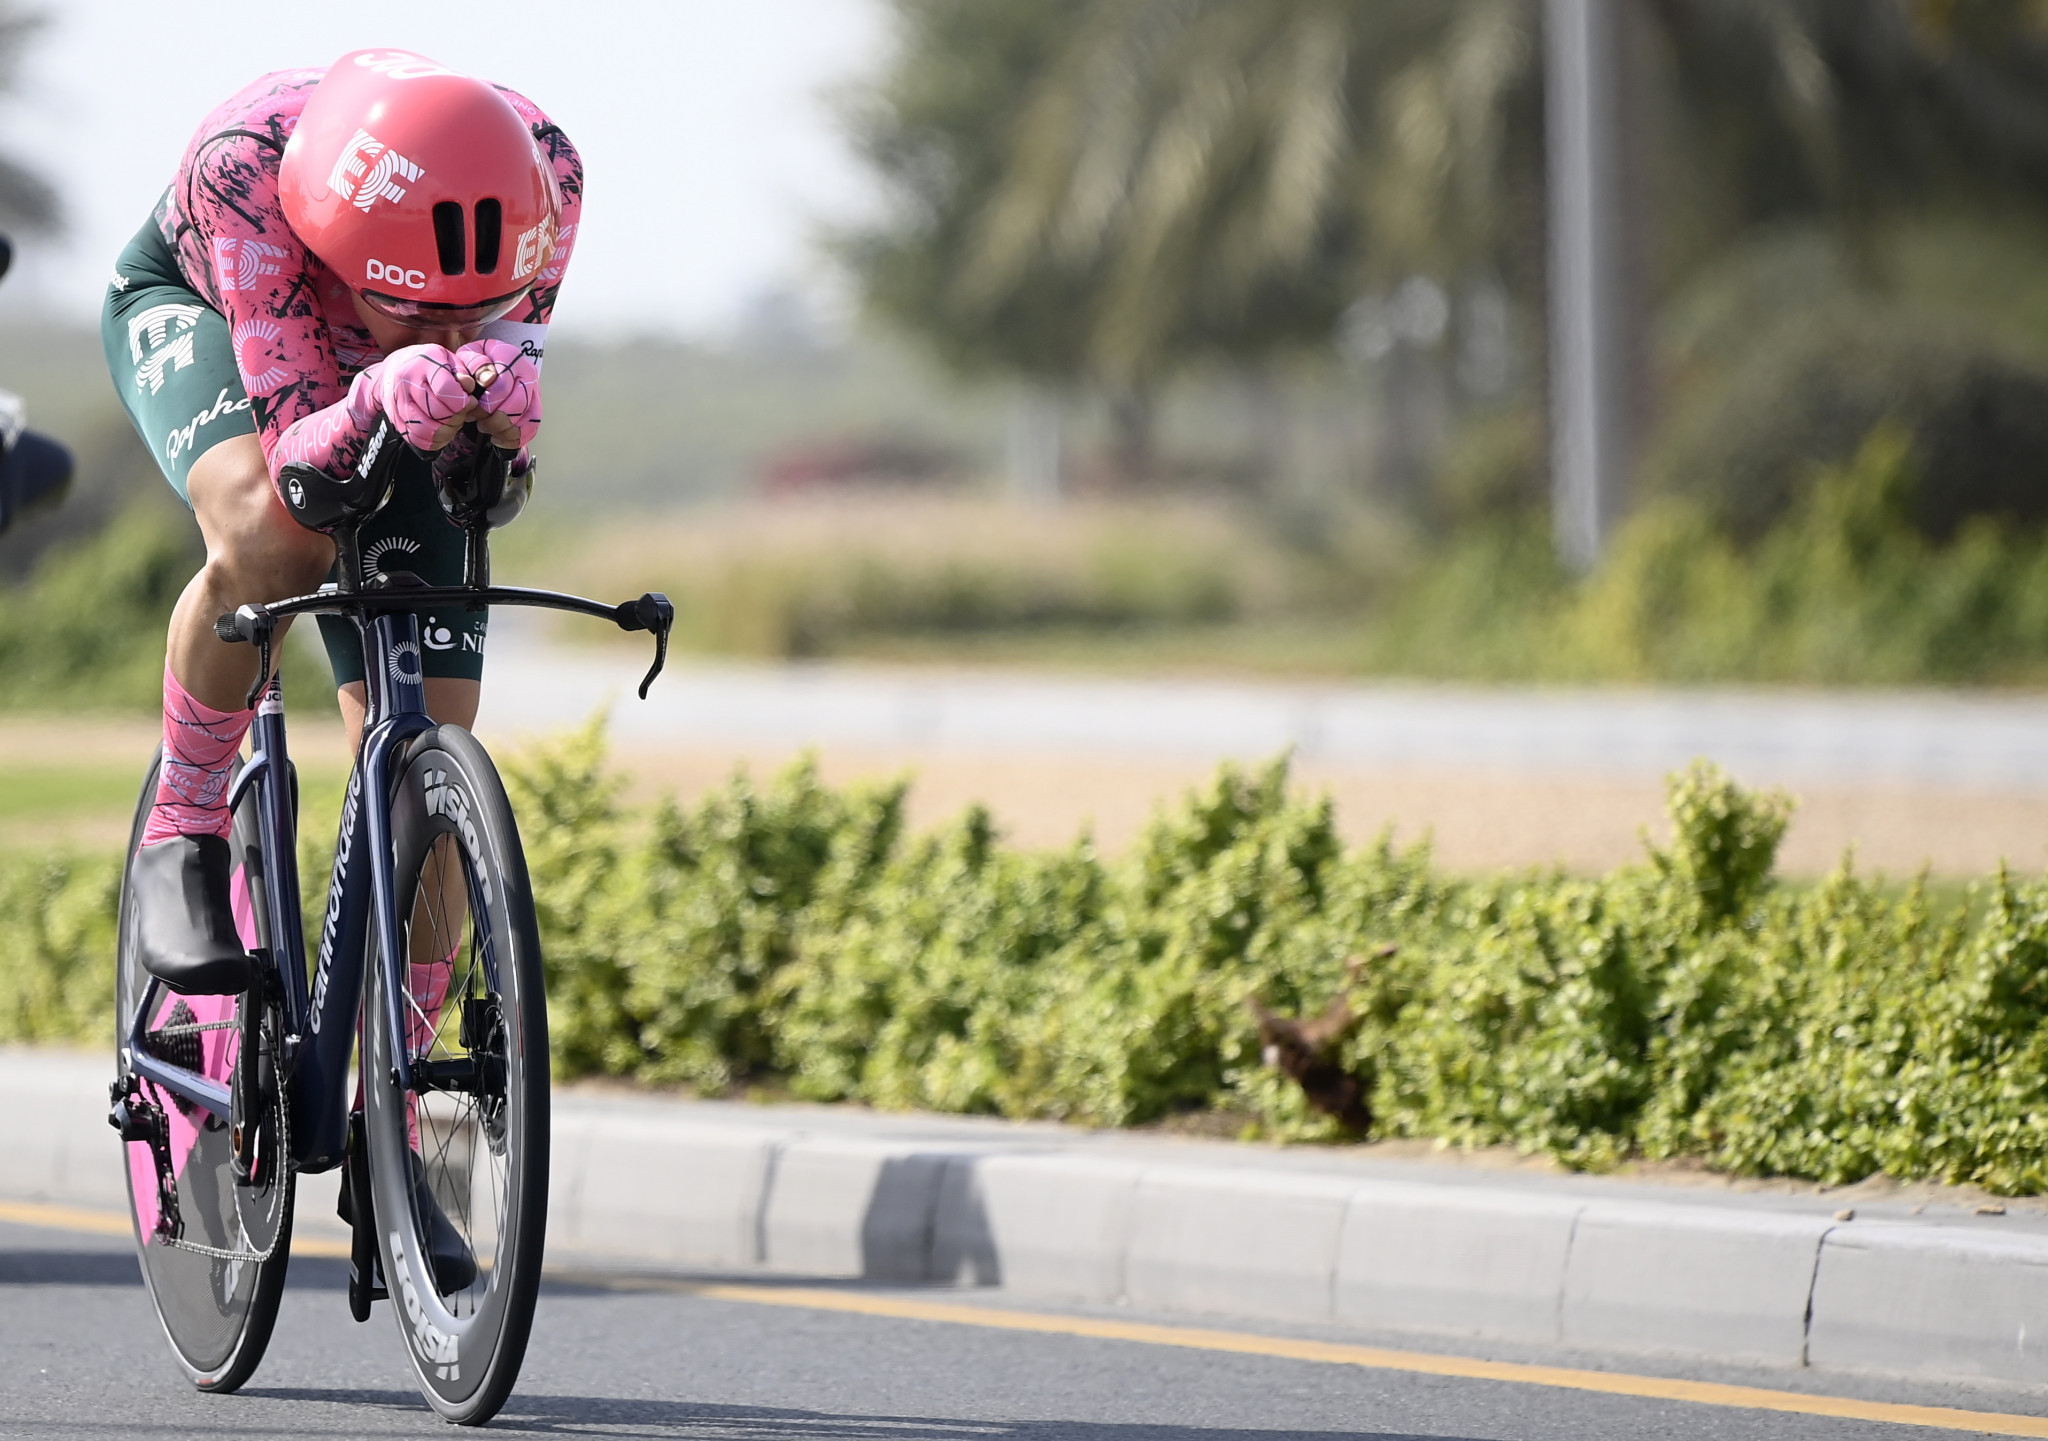 Bissegger wins individual time trial to seize UAE Tour lead